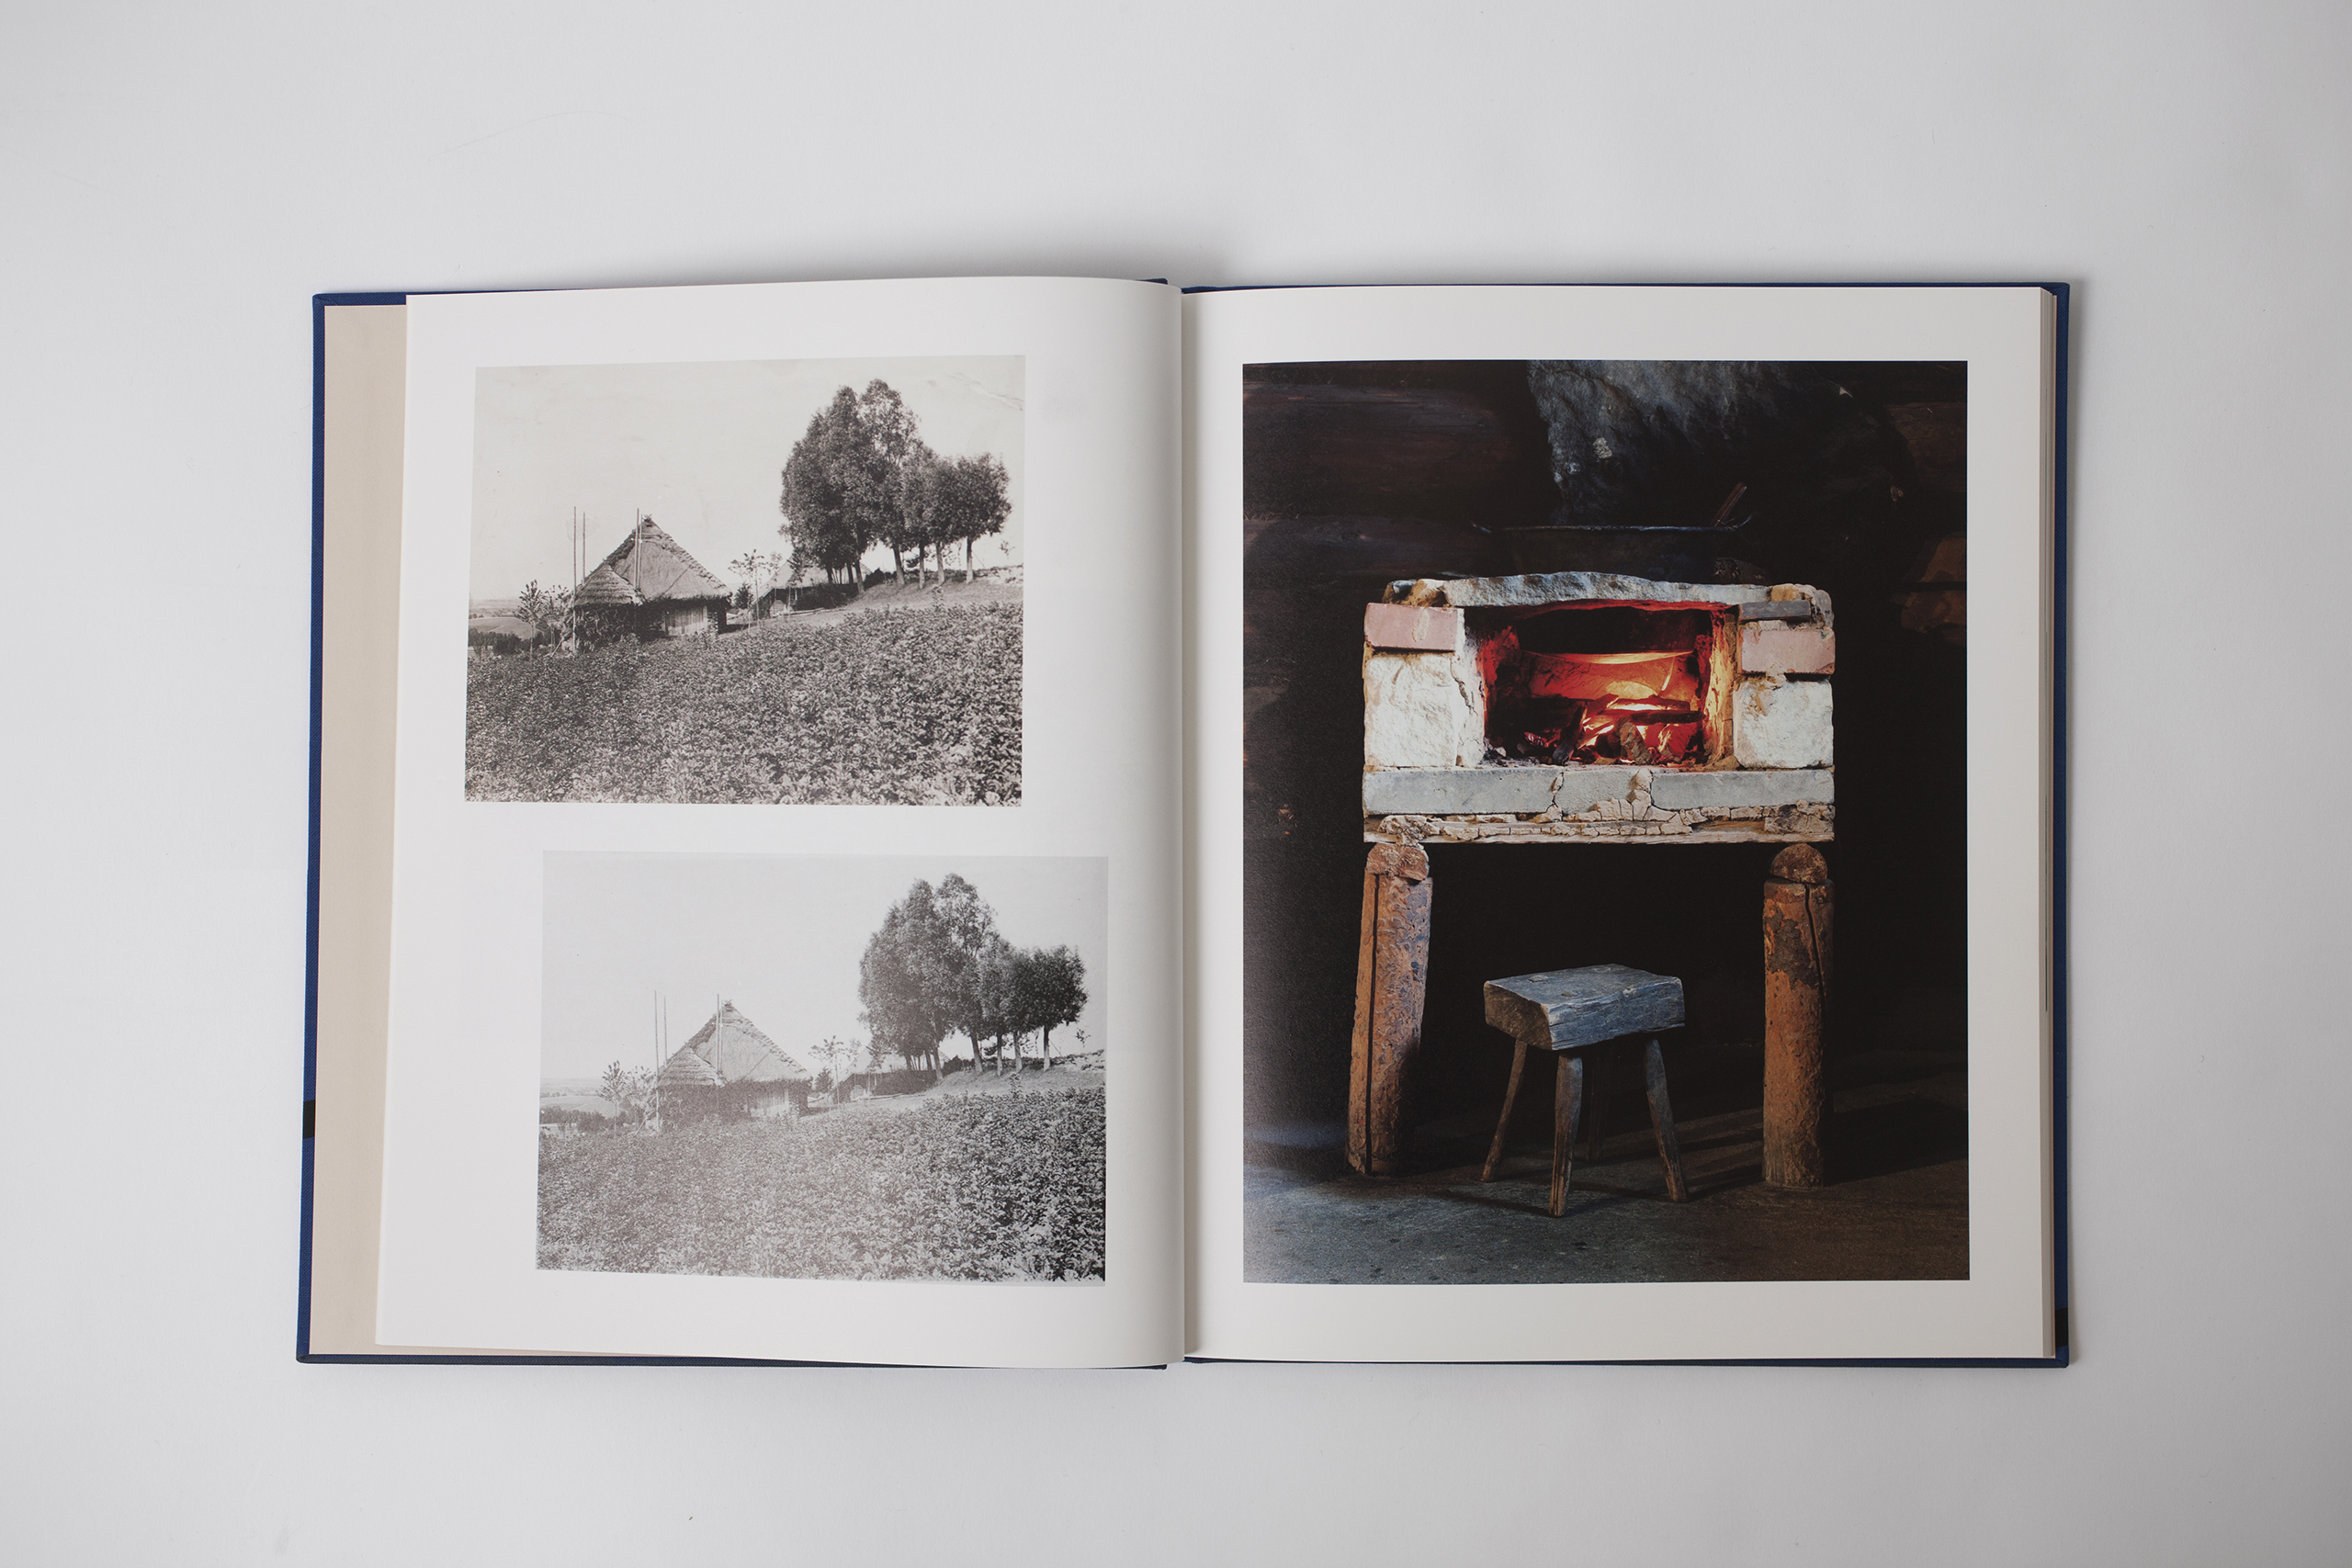 Selected by photographer and publisher Jason Fulford:  In his new book, Folk, Aaron Schuman documents the documentation of the process of documenting. The subject is the Ethnographic Museum in Krakow and its collection of folk culture from Eastern Galicia, Schuman’s ancestral home.Schuman’s photographs of the region and the museum are combined with photographs from the museum’s archive, shot on research trips in the countryside over the last century. They often depict a staff photographer photographing an object, in the field, that is now part of the museum’s collection.So the structure of the book is layered and meta, but the overwhelming feeling is less intellectual and more emotional. It’s about love—for people and the things that we make, and for the people who spend their lives preserving stories.”